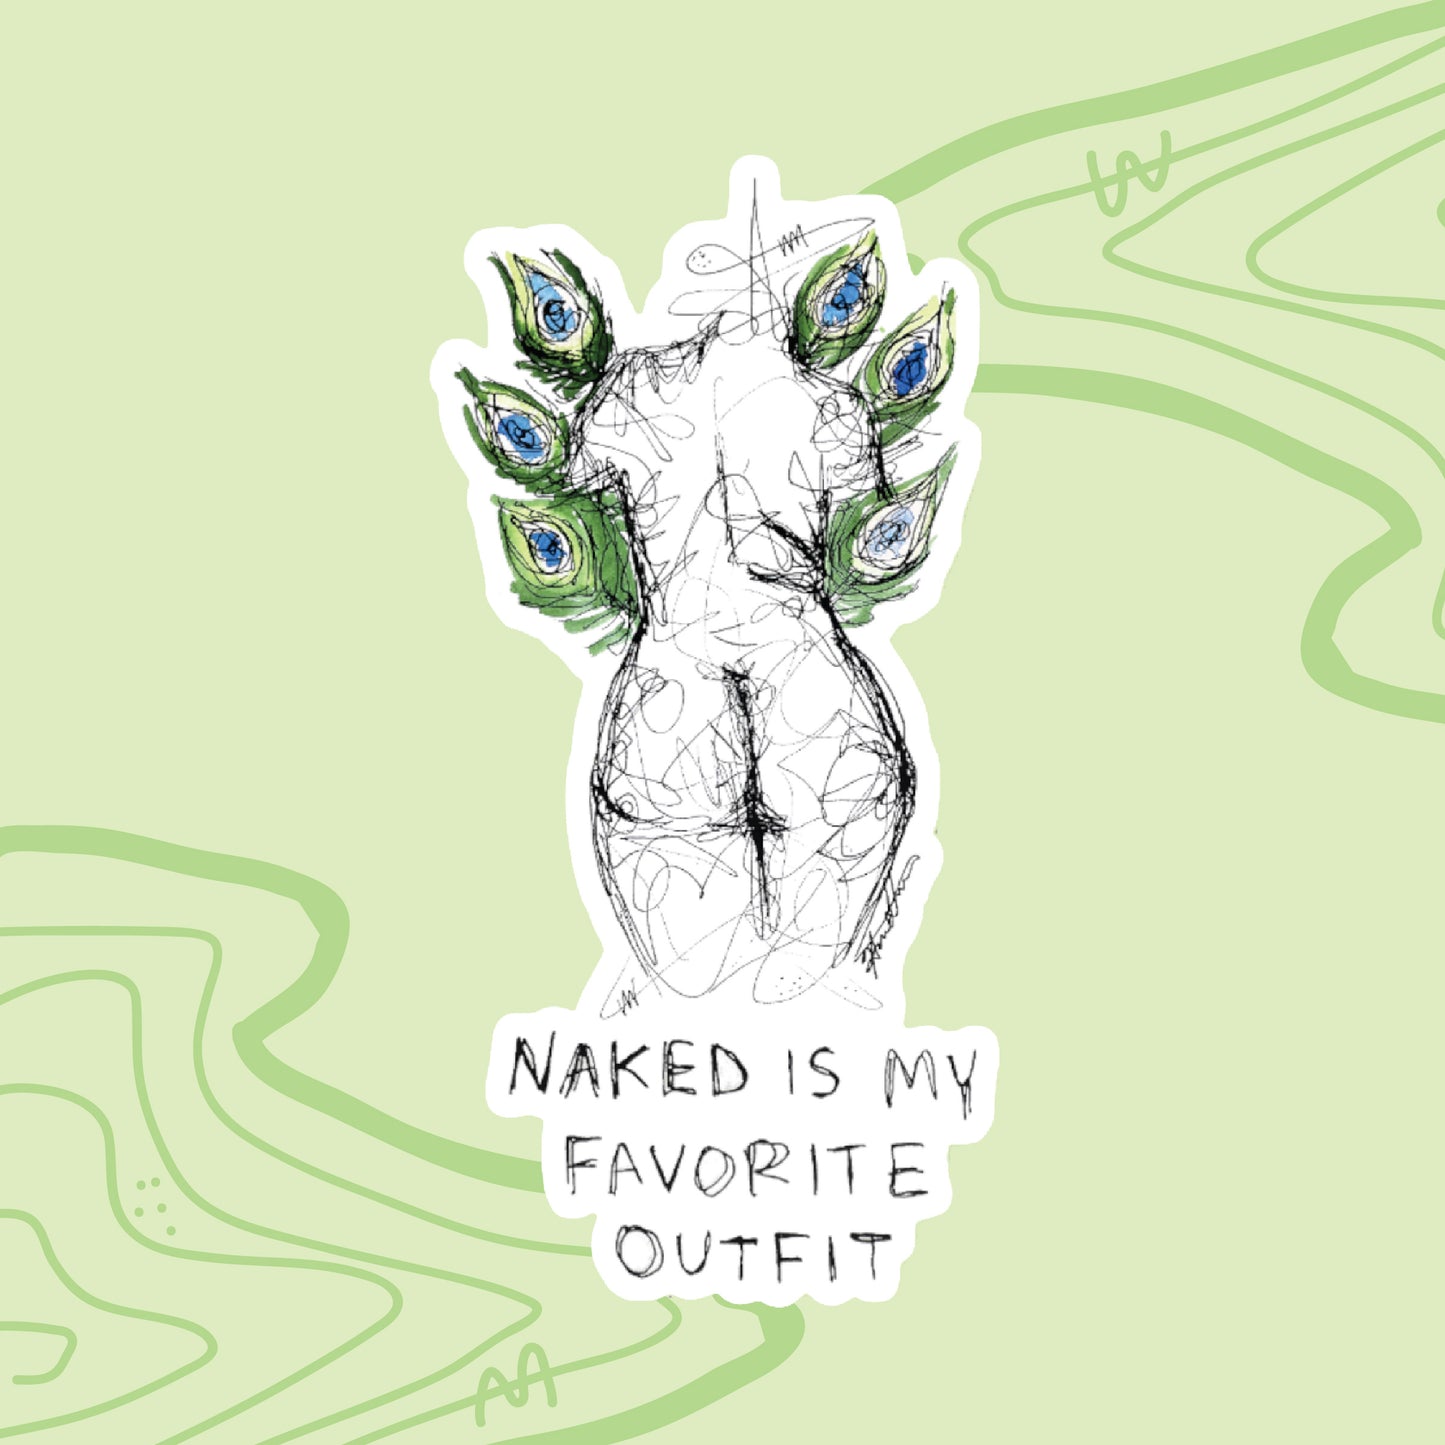 "Naked is my favorite outfit" Sticker